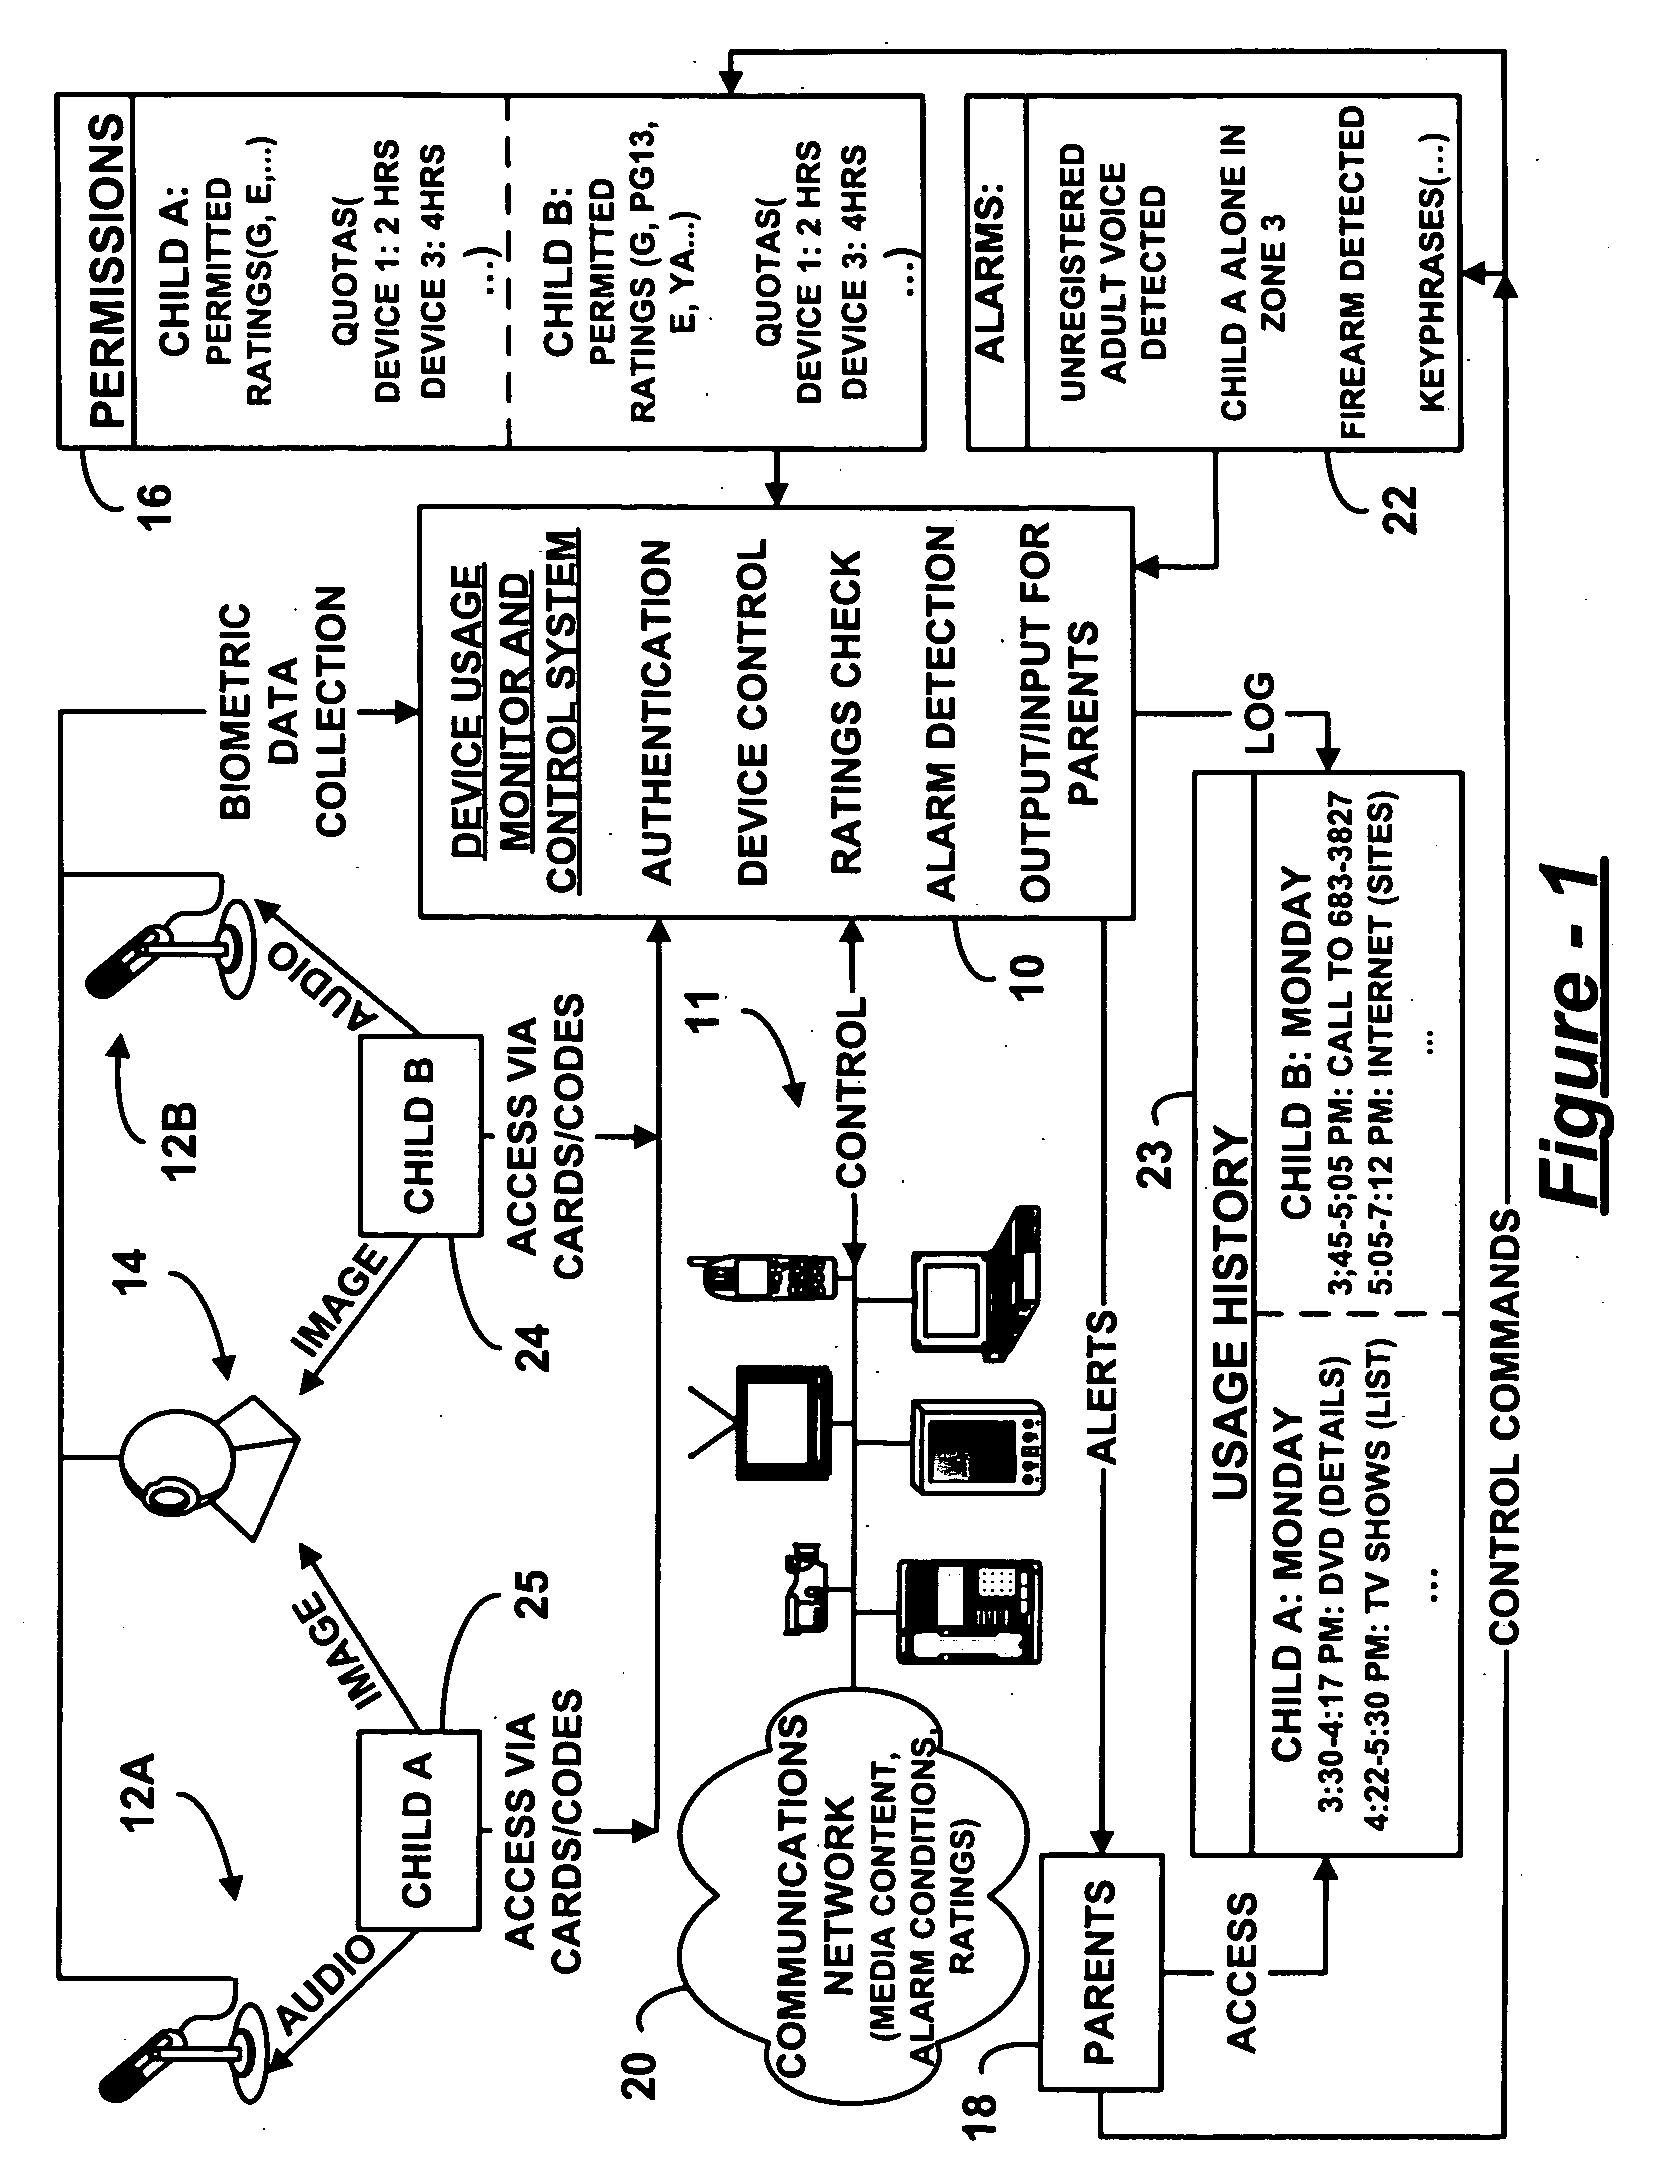 Method for parental control and monitoring of usage of devices connected to home network